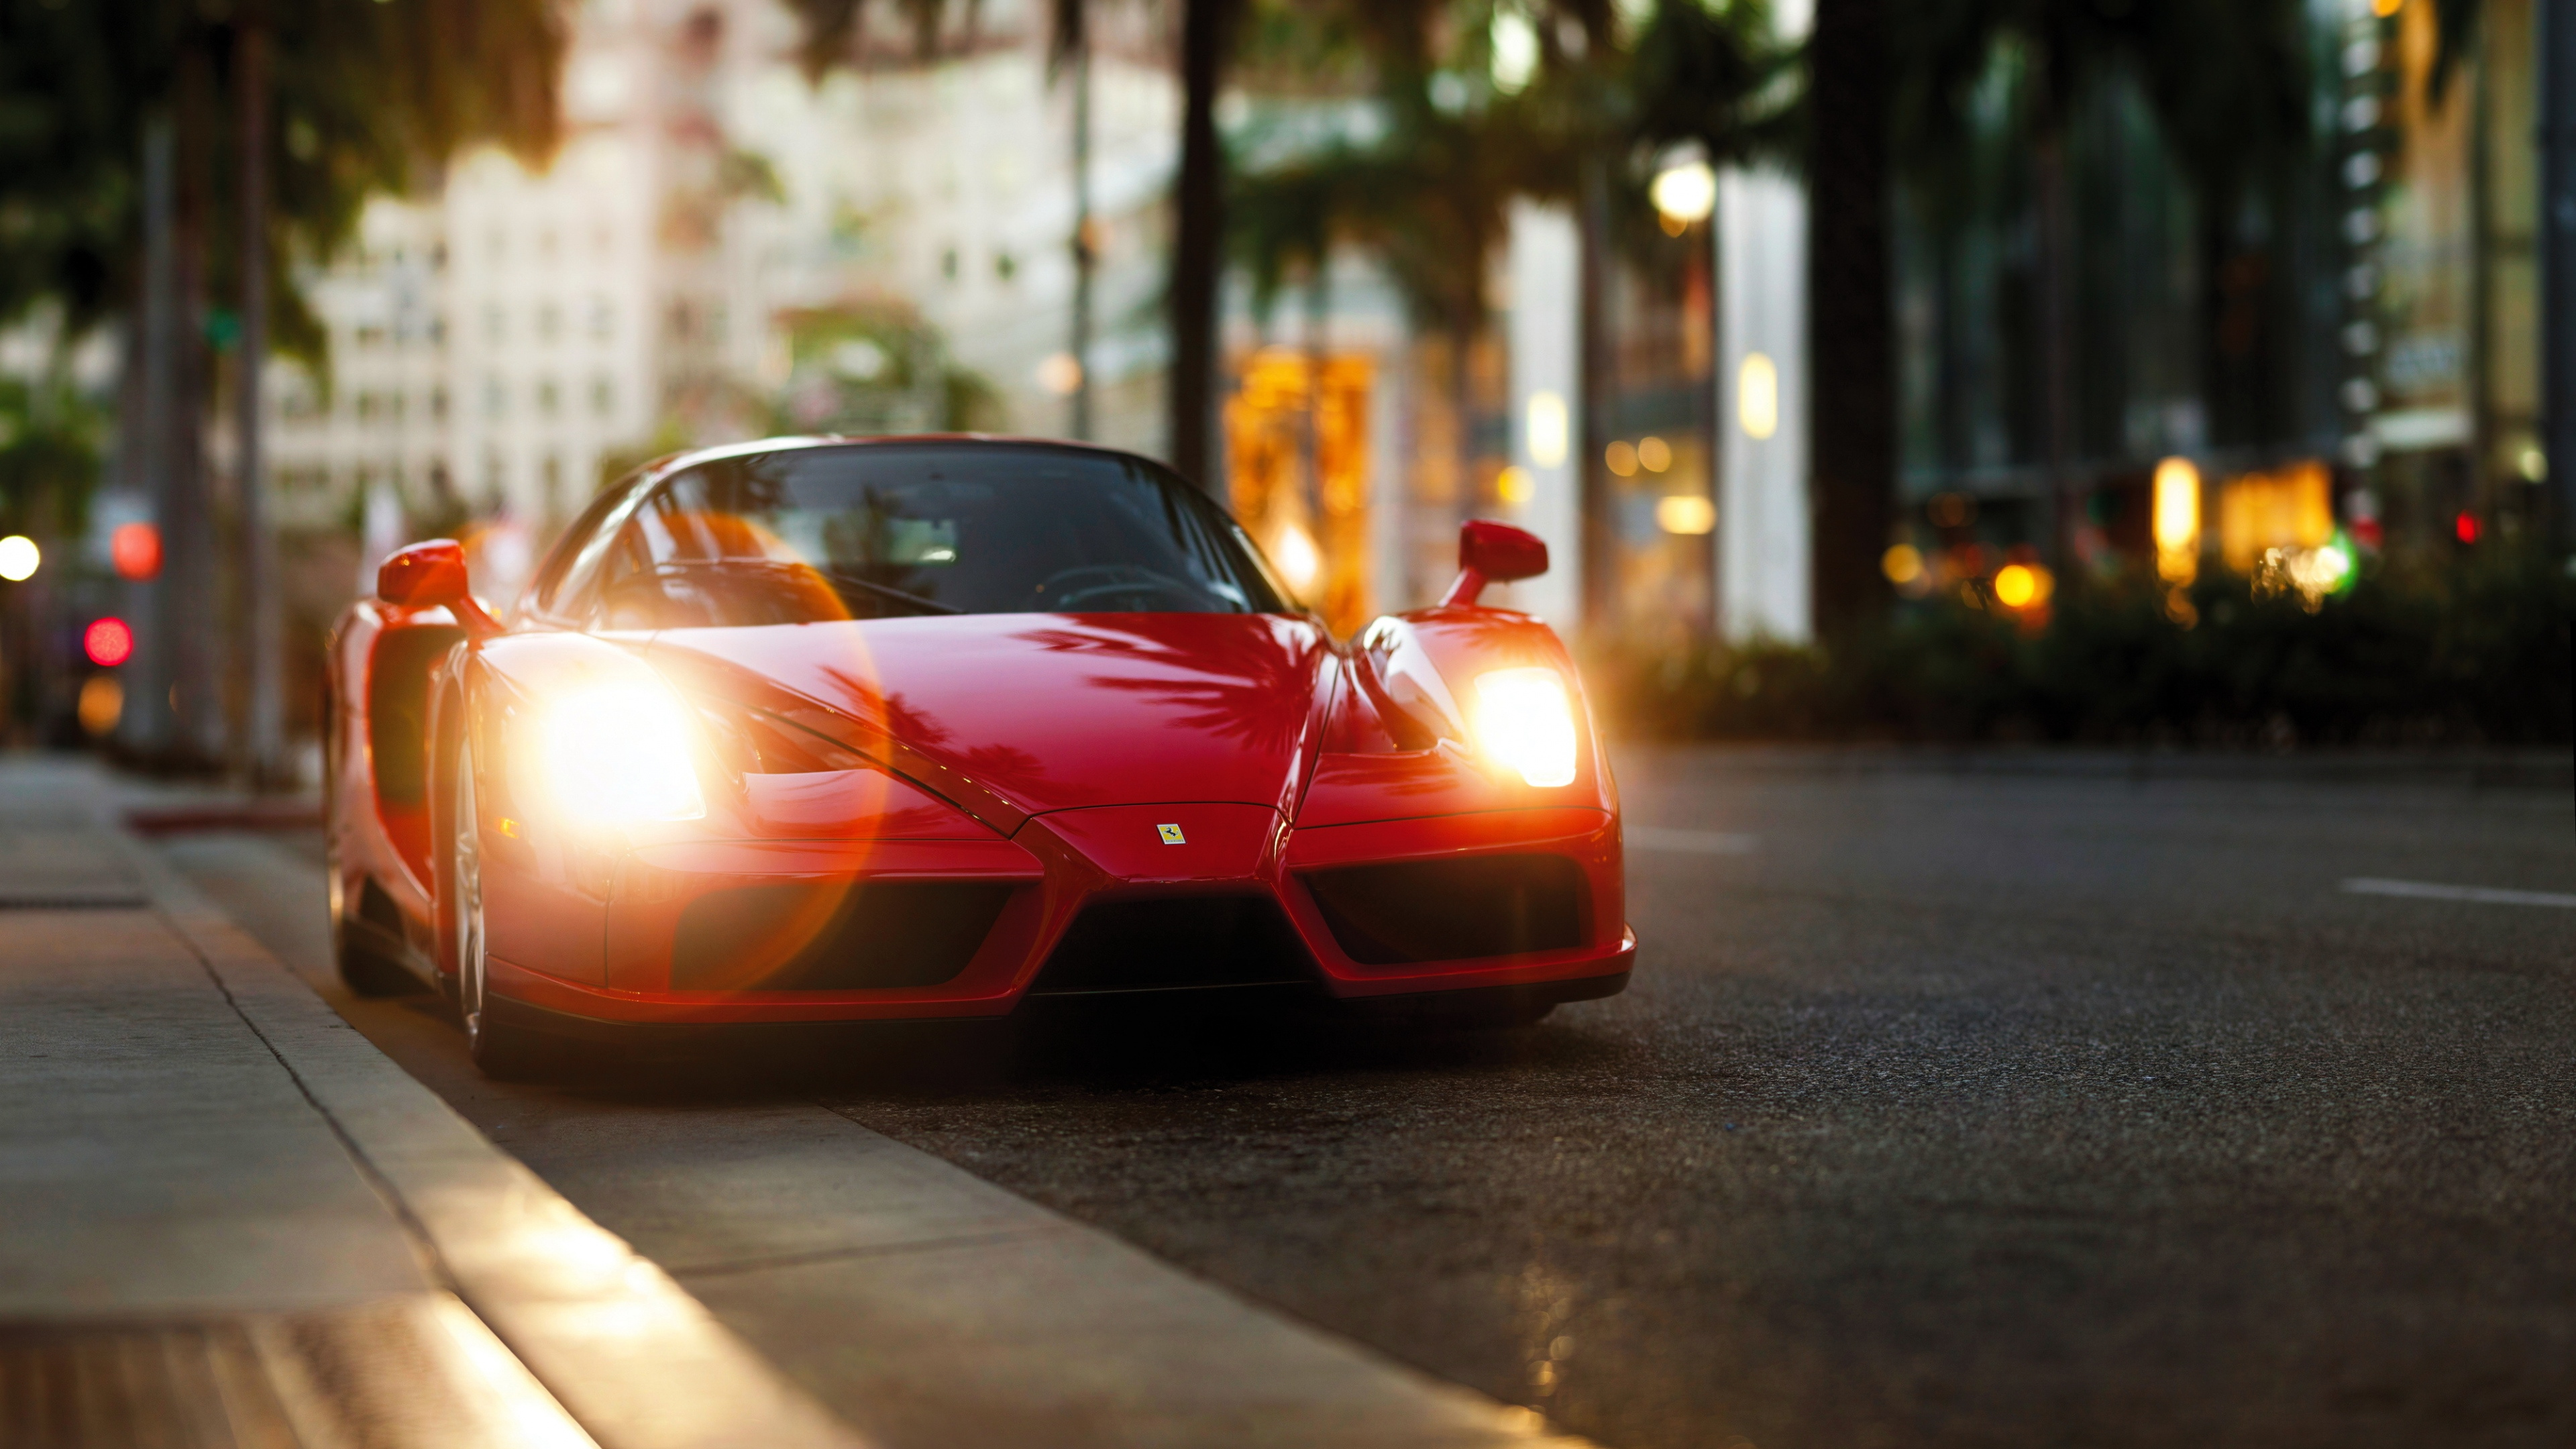 Red Ferrari Sports Car on Road During Daytime. Wallpaper in 3840x2160 Resolution